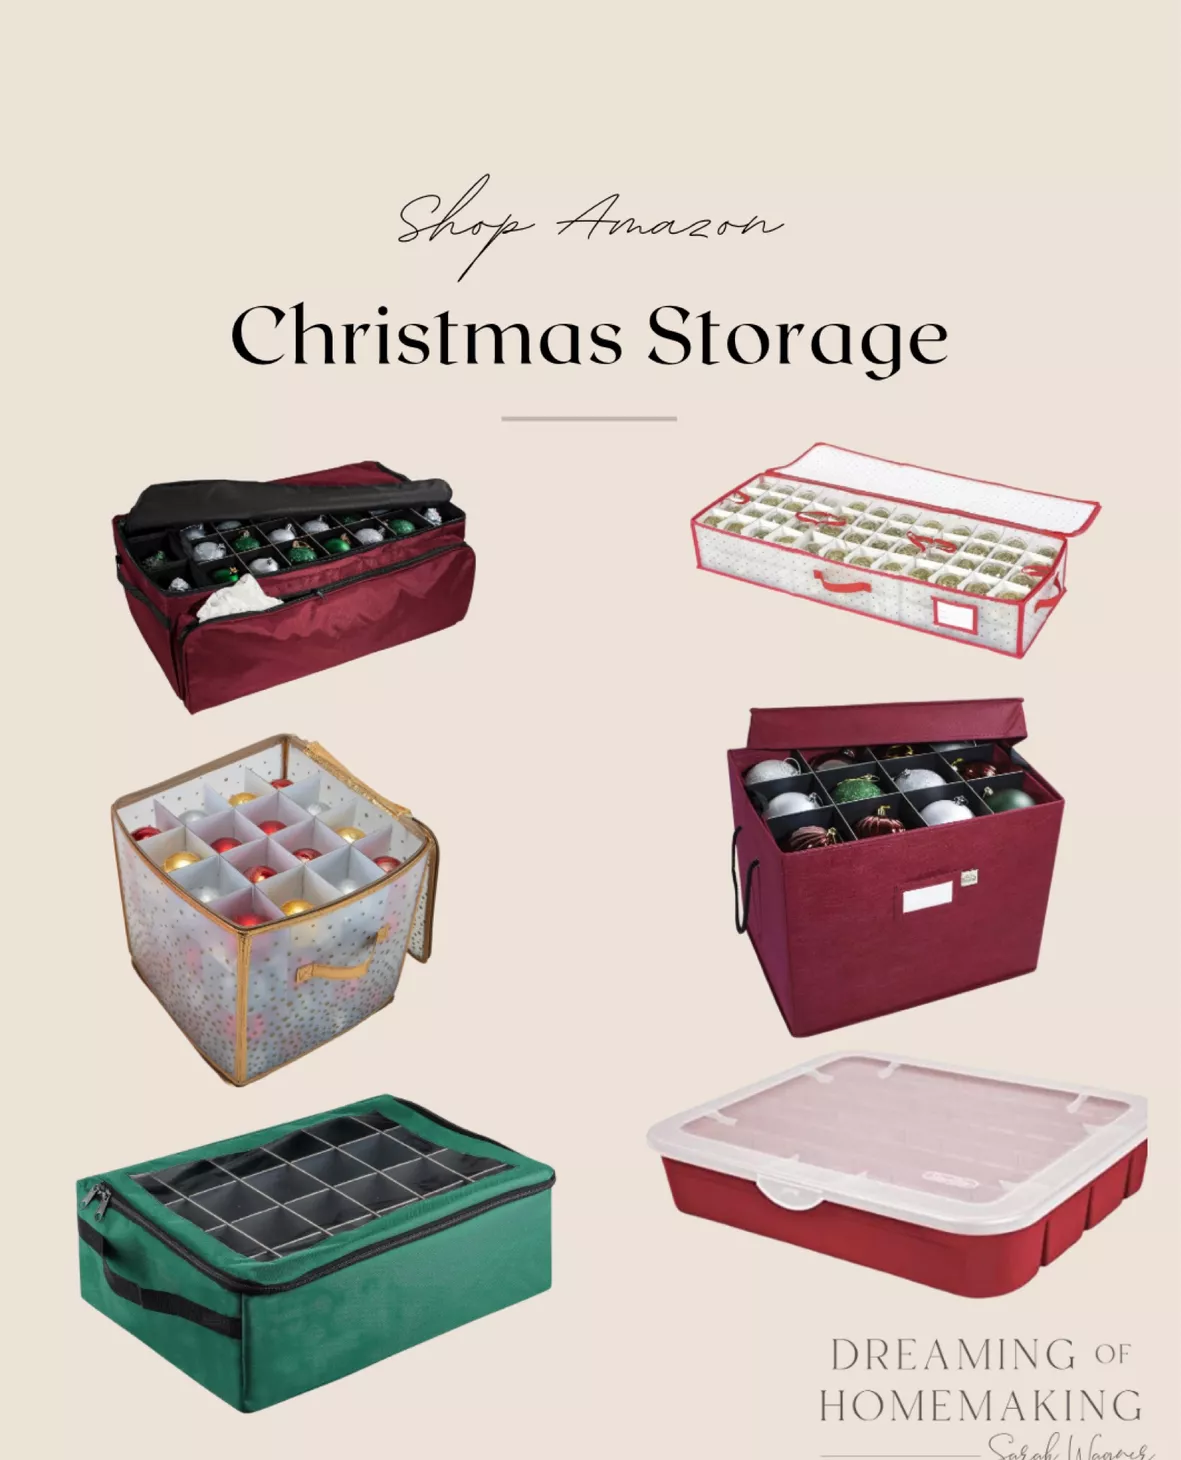  Underbed Christmas Ornament Storage Box Zippered